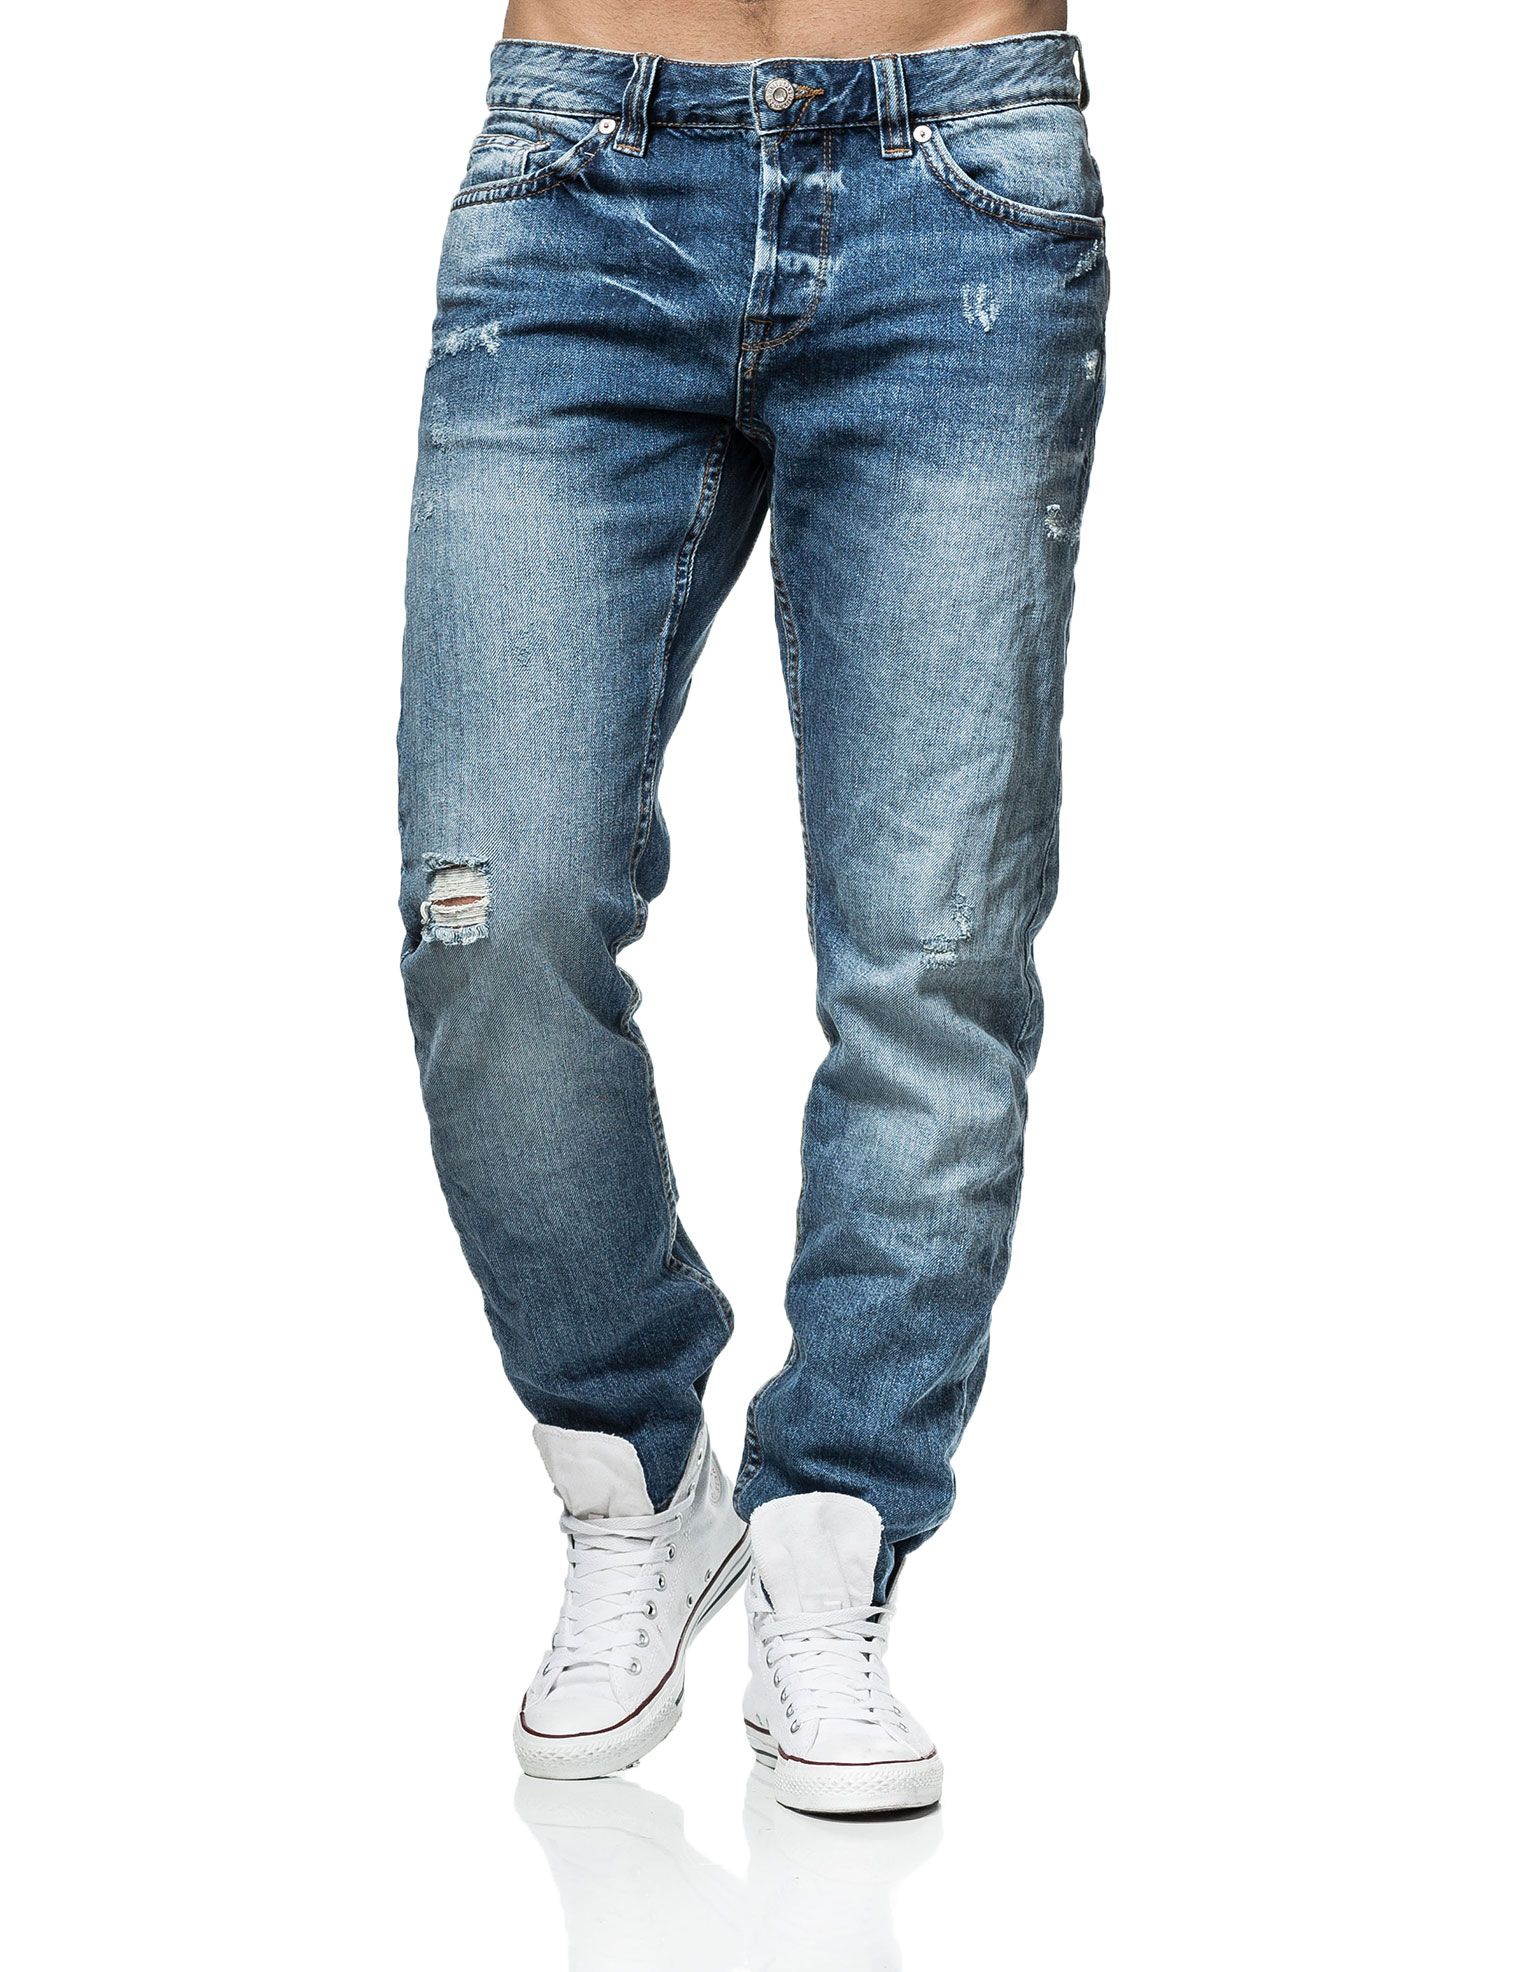 Weft Jeans L34 Only & Sons - 0798 - Jeans - Jerone.com